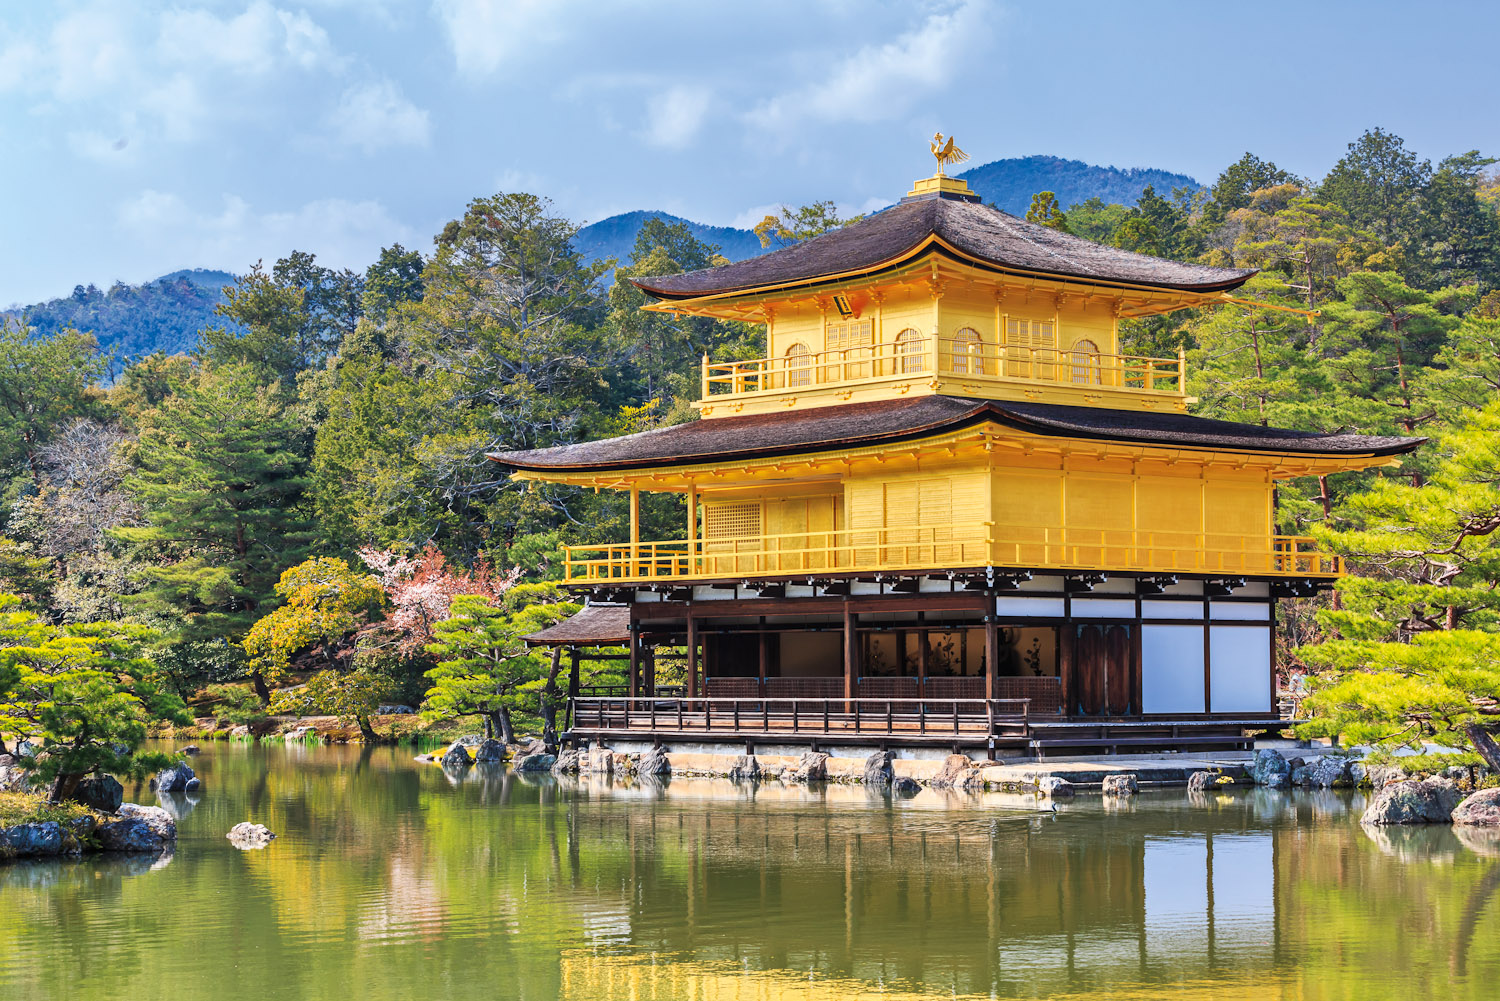 Temple of the Golden Pavilion in Kyoto, Japan.